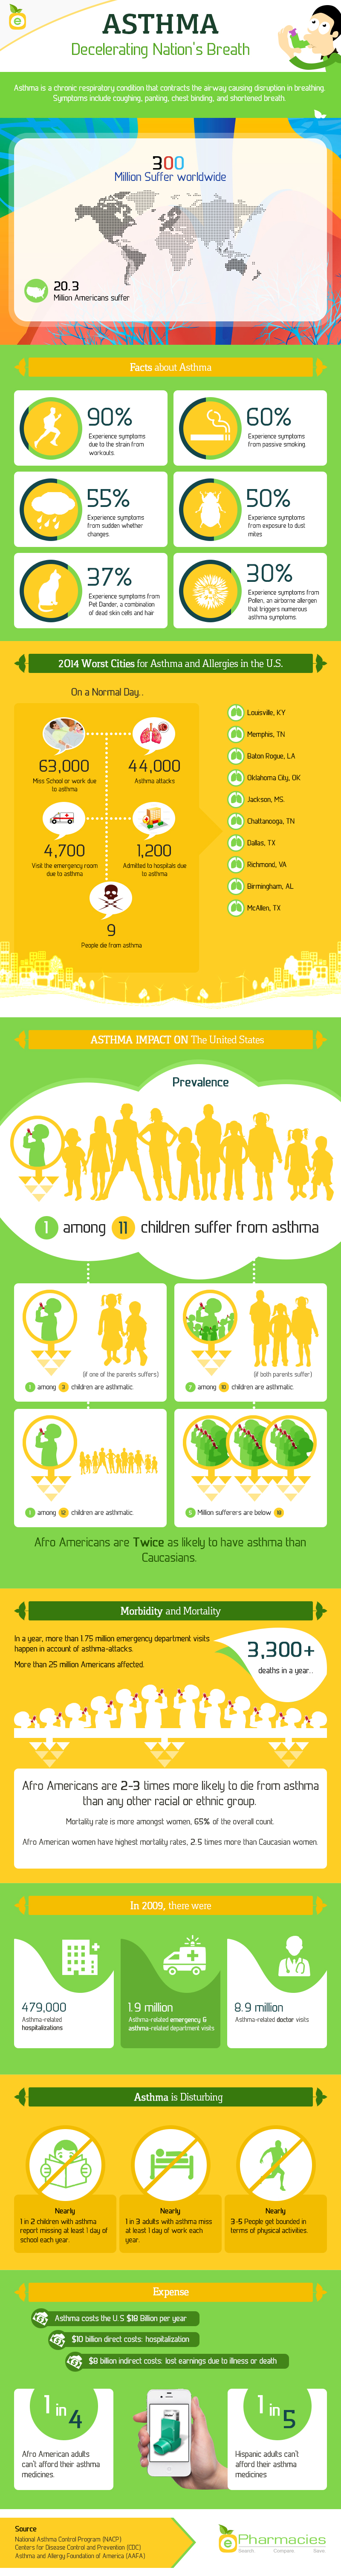 Shocking Effects of Asthma